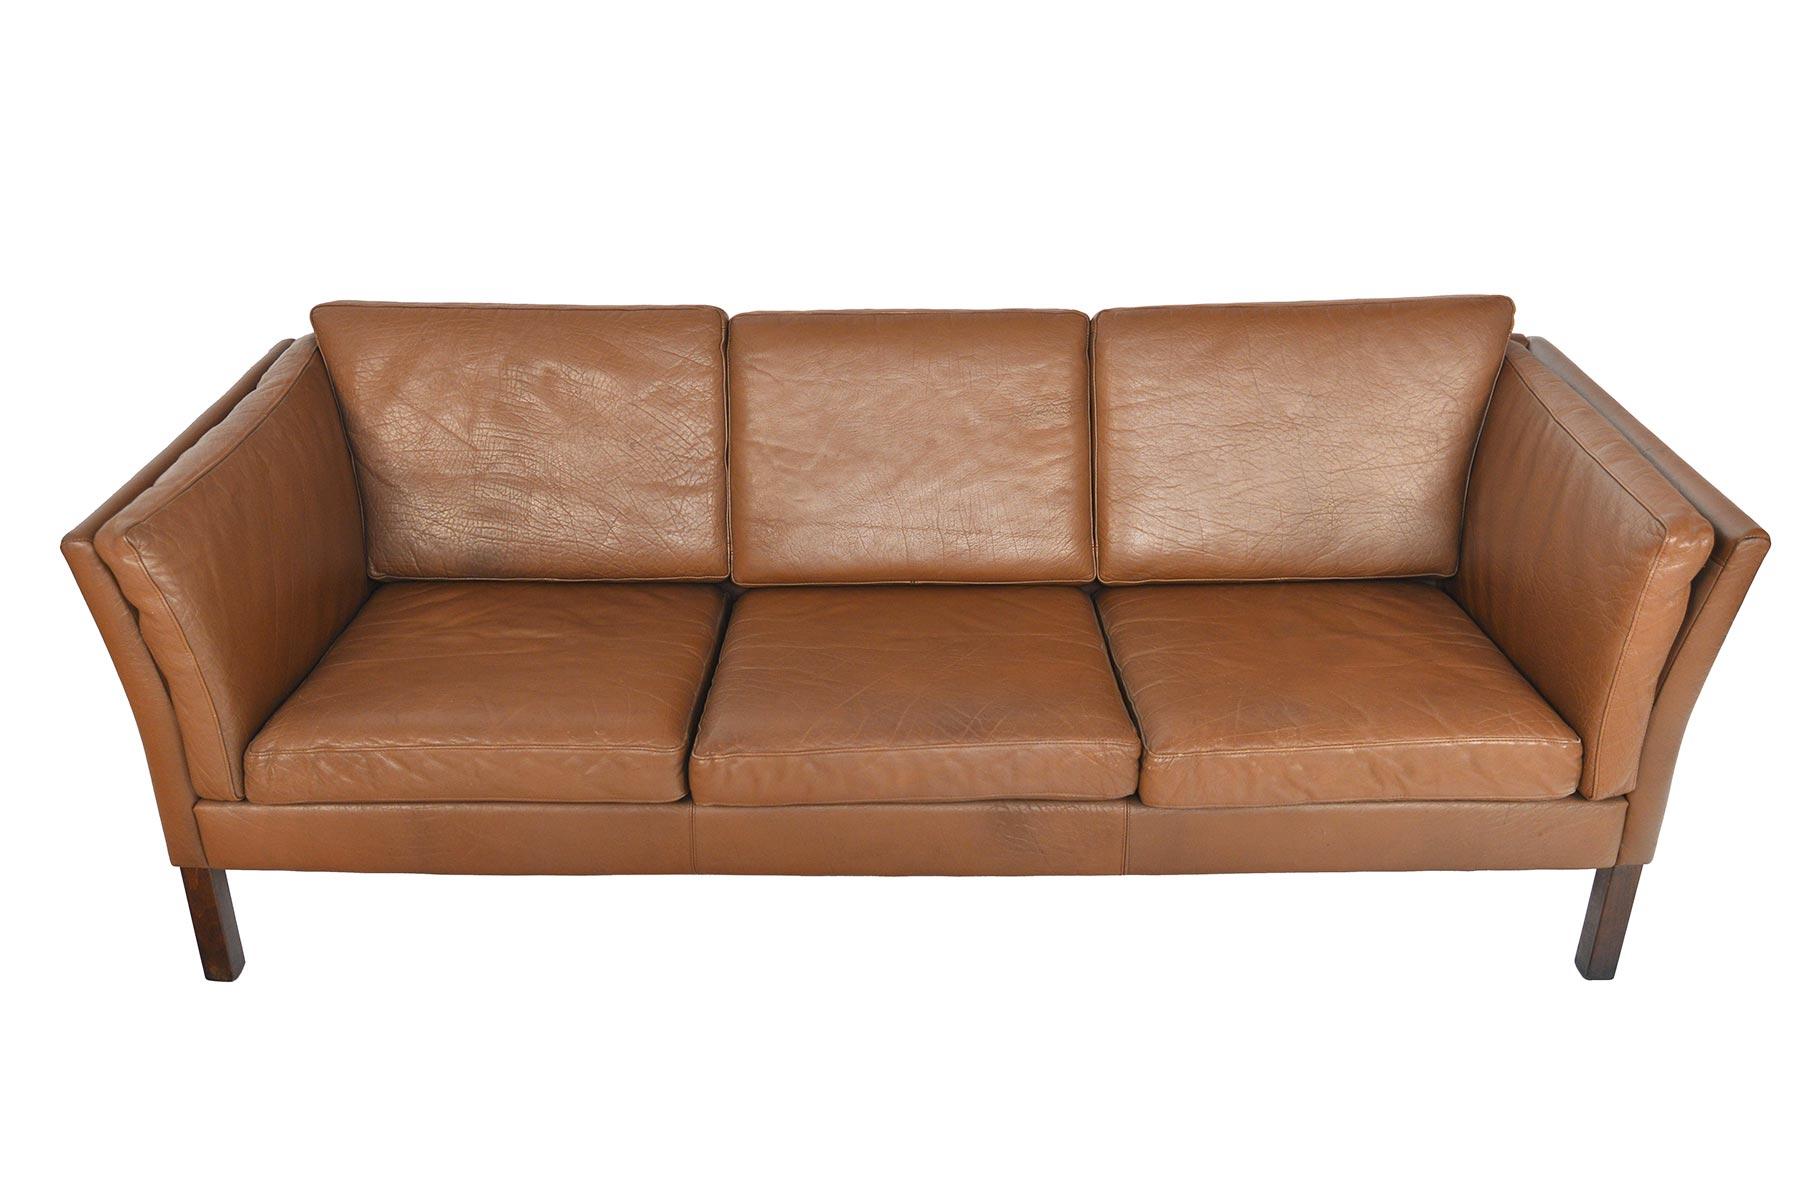 This Danish modern sofa is covered in original patinated brown leather. The simple bowed arm design offers an elegant profile. Eight cushions line the interior for a comfortable sitting experience. The sofa stands on a tapered stained beech base.